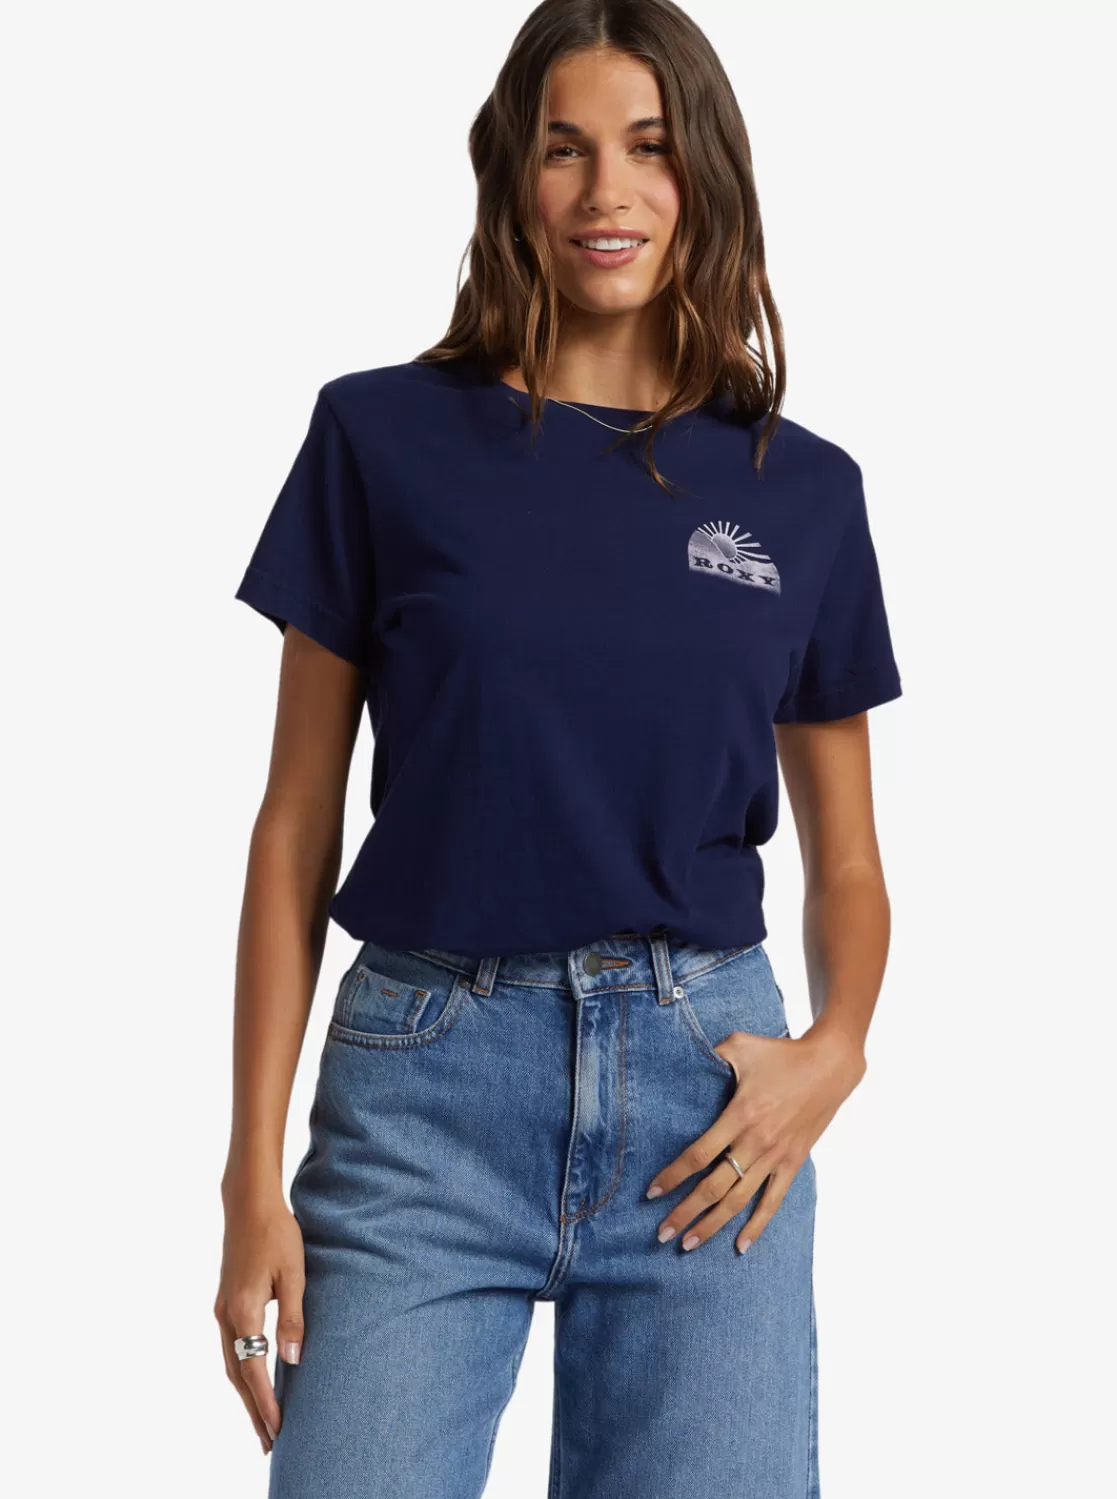 Get Lost In The Moment Boyfriend T-Shirt-ROXY Store